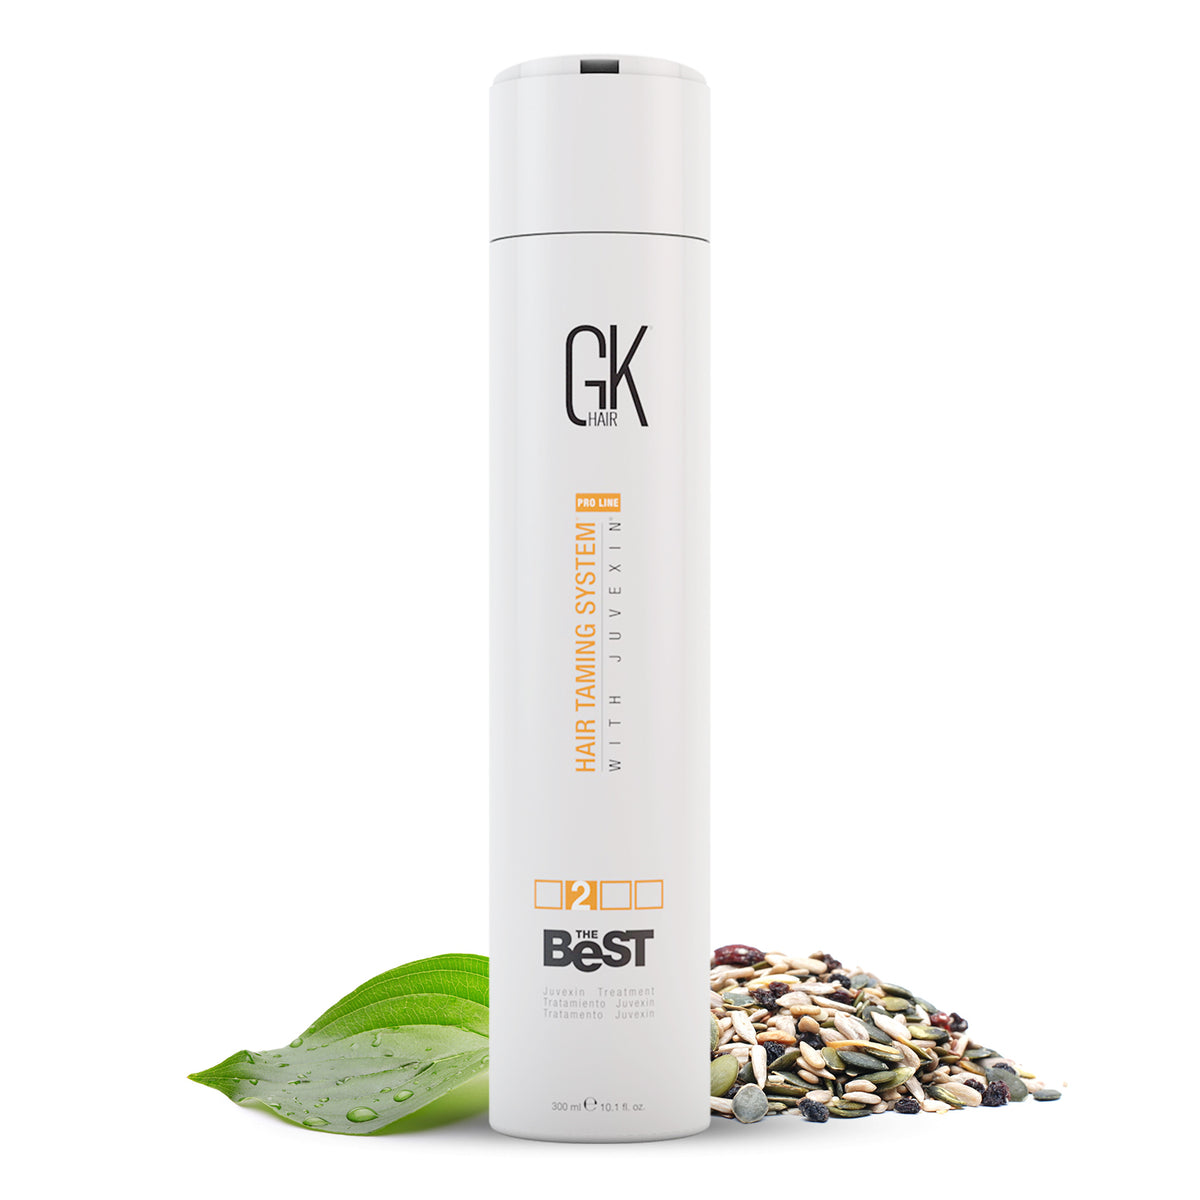 Buy GK HAIR Global Keratin Balancing Shampoo and Conditioner Sets 101 Fl  Oz300ml with Leave In Cashmere Smoothing and Styling Cream 169 Fl  Oz50ml For Dry Damaged Frizzy Oily  Color Treated